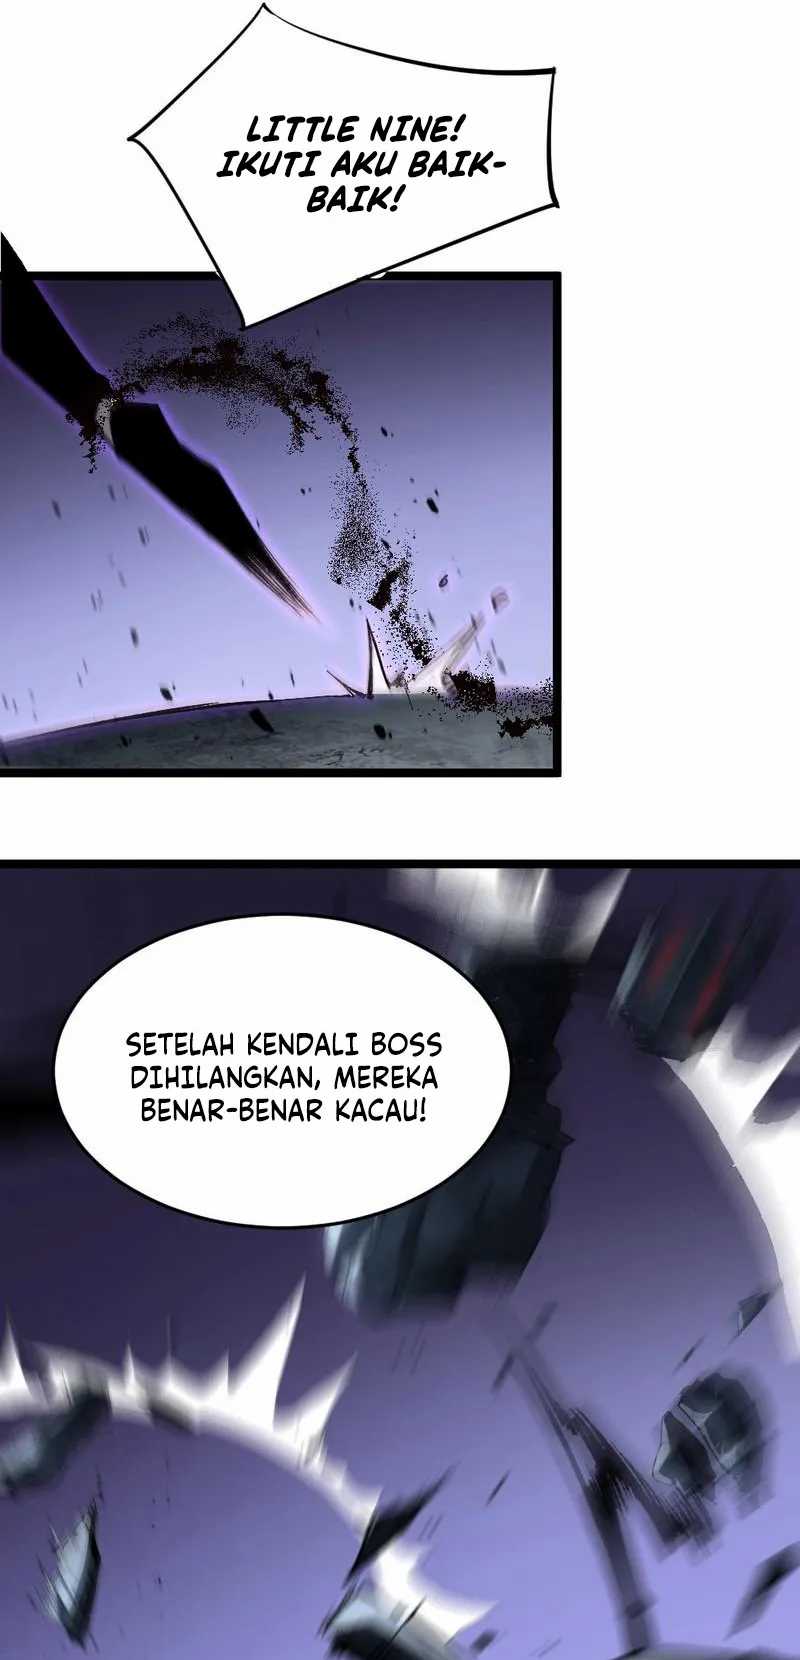 Overlord of Insects Chapter 06